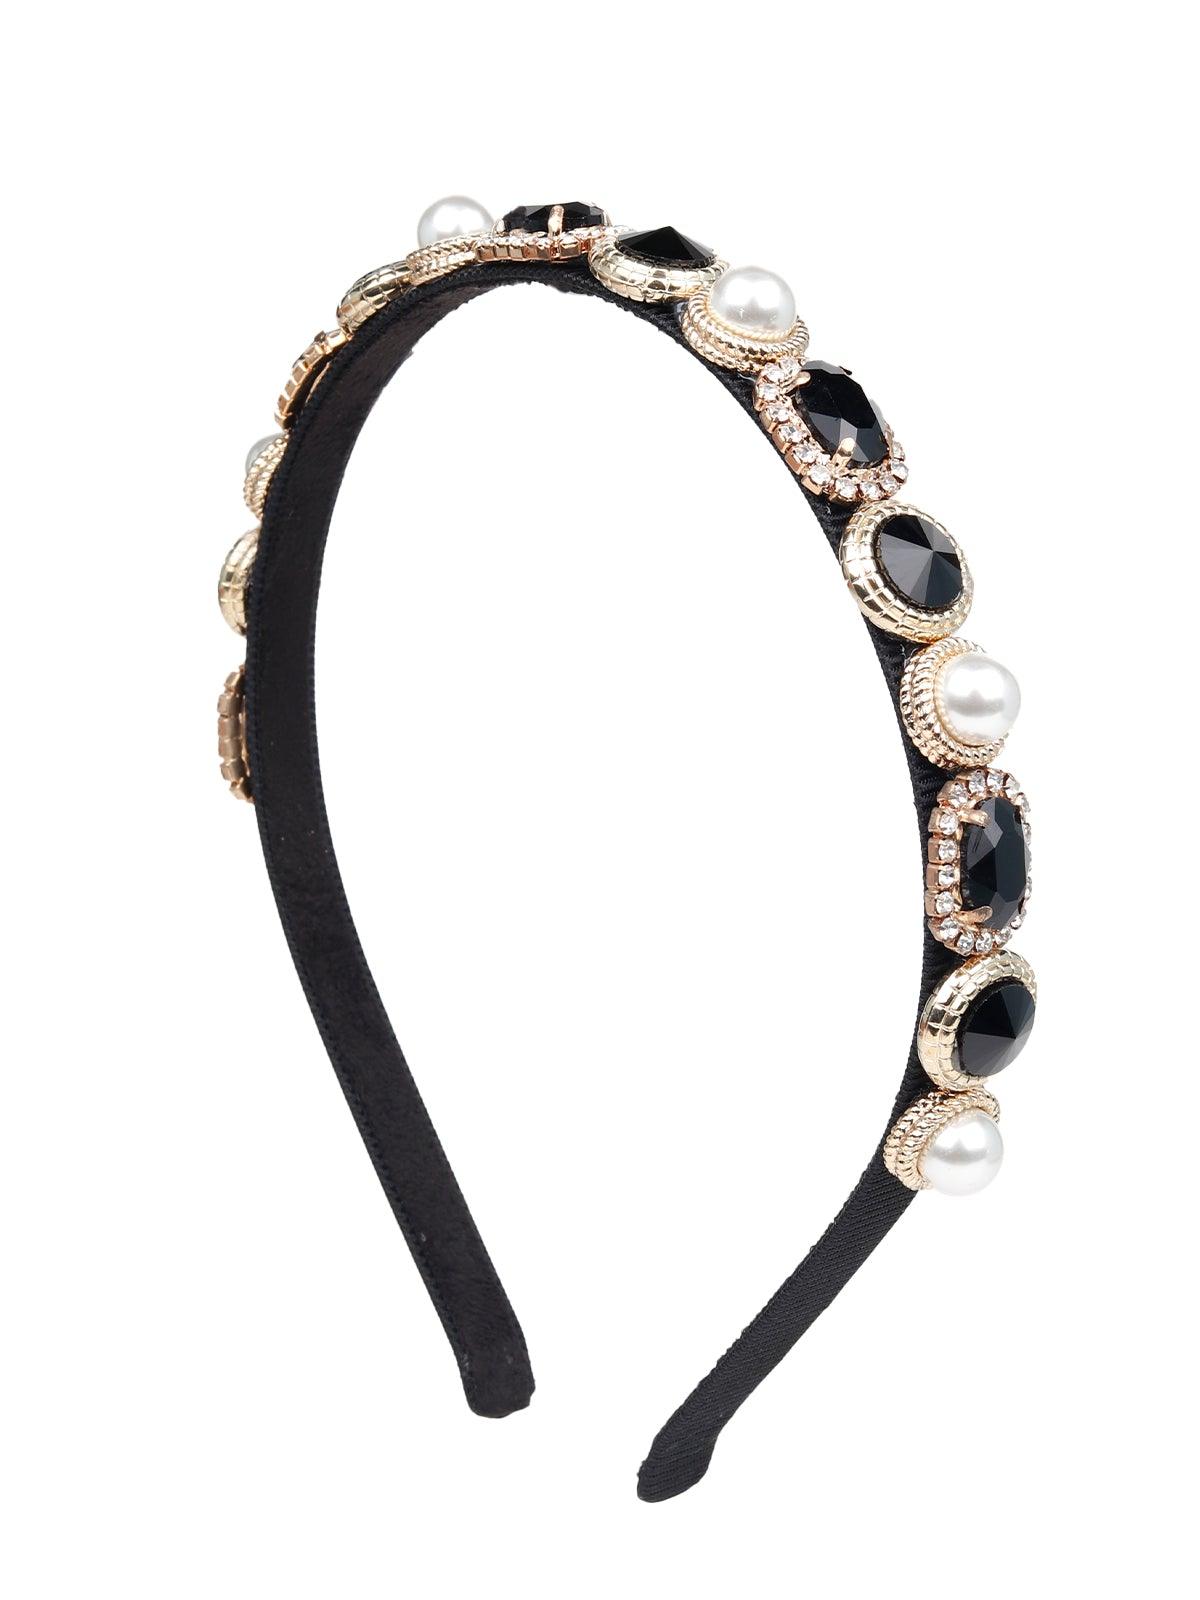 Exquisite Black And White Crystal-Studded Hairband - Odette